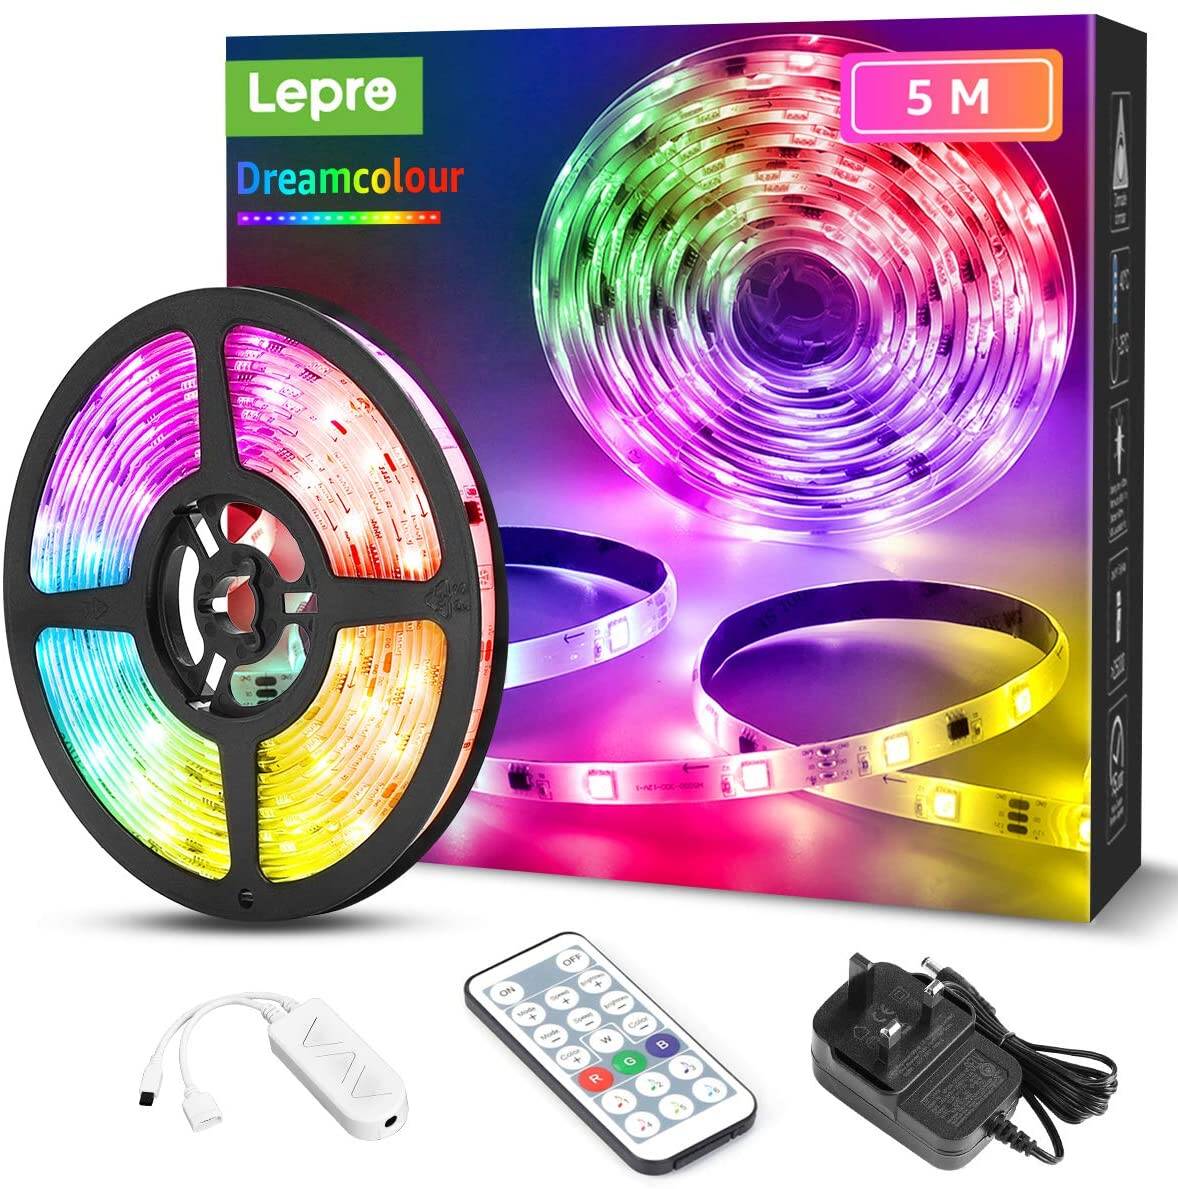 Lepro 10M LED Strip Lights with Remote, 5050 RGB Colour Changing, Plug and  Play, Stick-on LED Light for Bedroom, Kitchen, Bar Decoration (2 x 5 Metres)